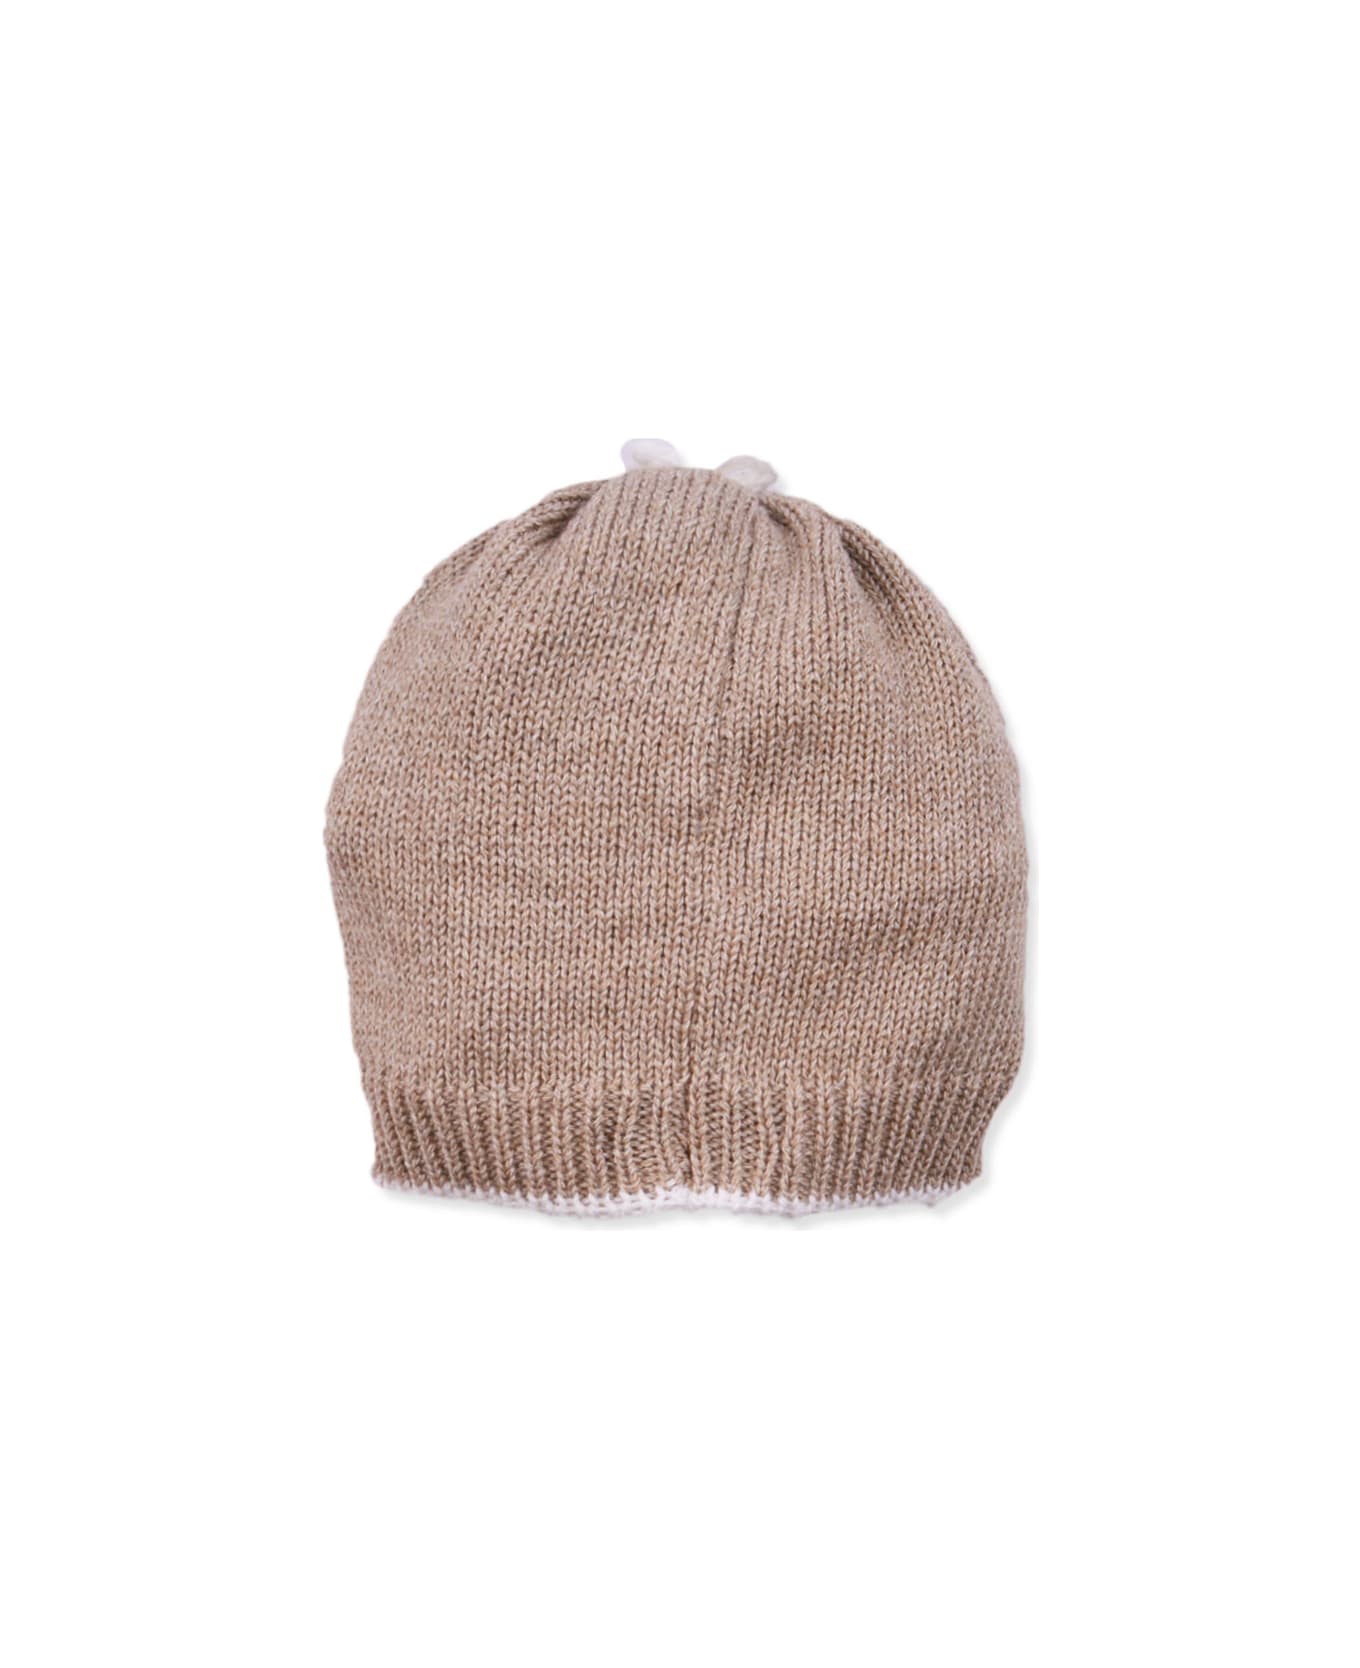 Piccola Giuggiola Cotton Knitted Hat - Brown